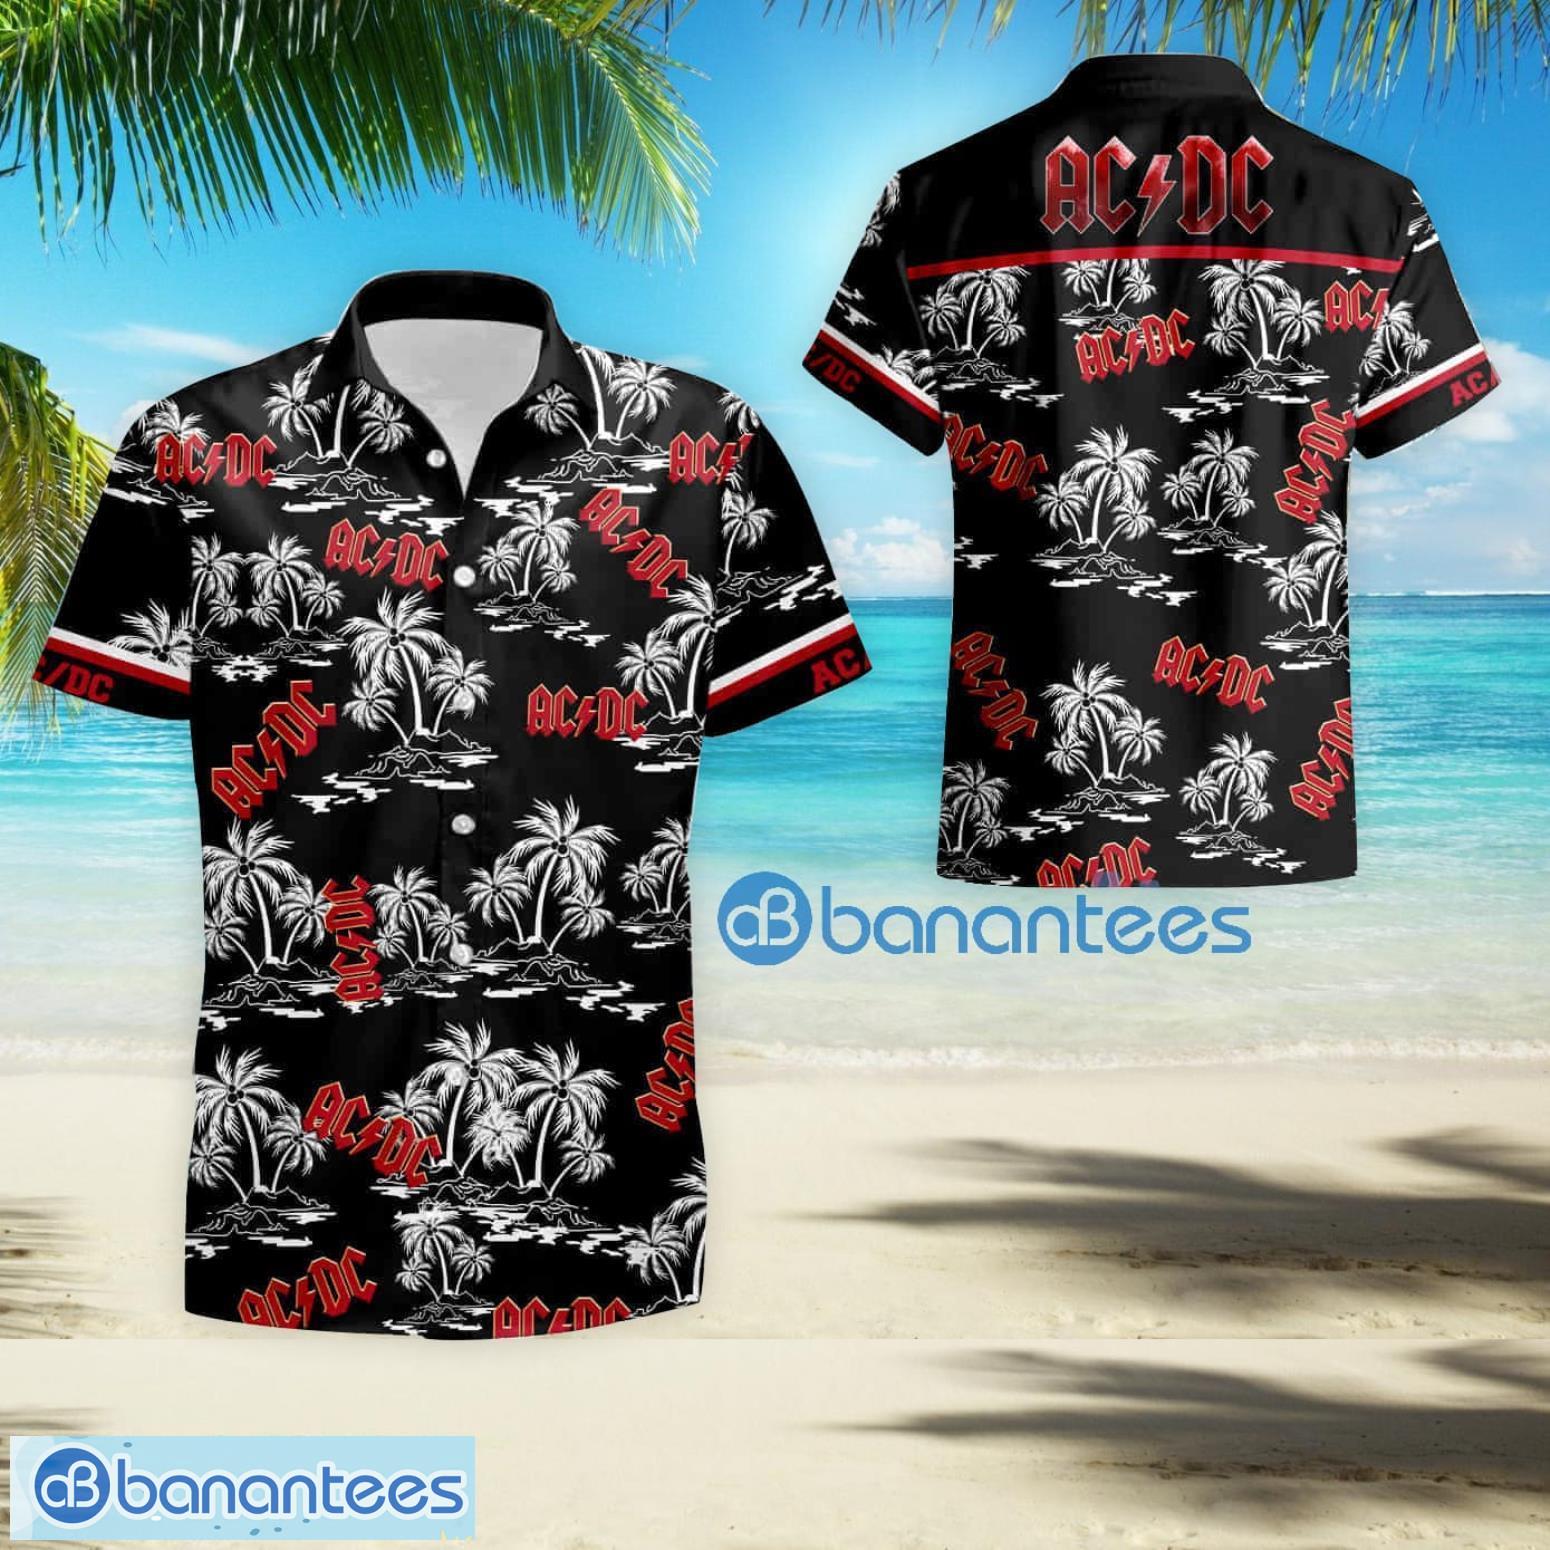 Acdc Vintage Coconut Summer Gift Hawaiian Shirt For Men And Women Product Photo 1